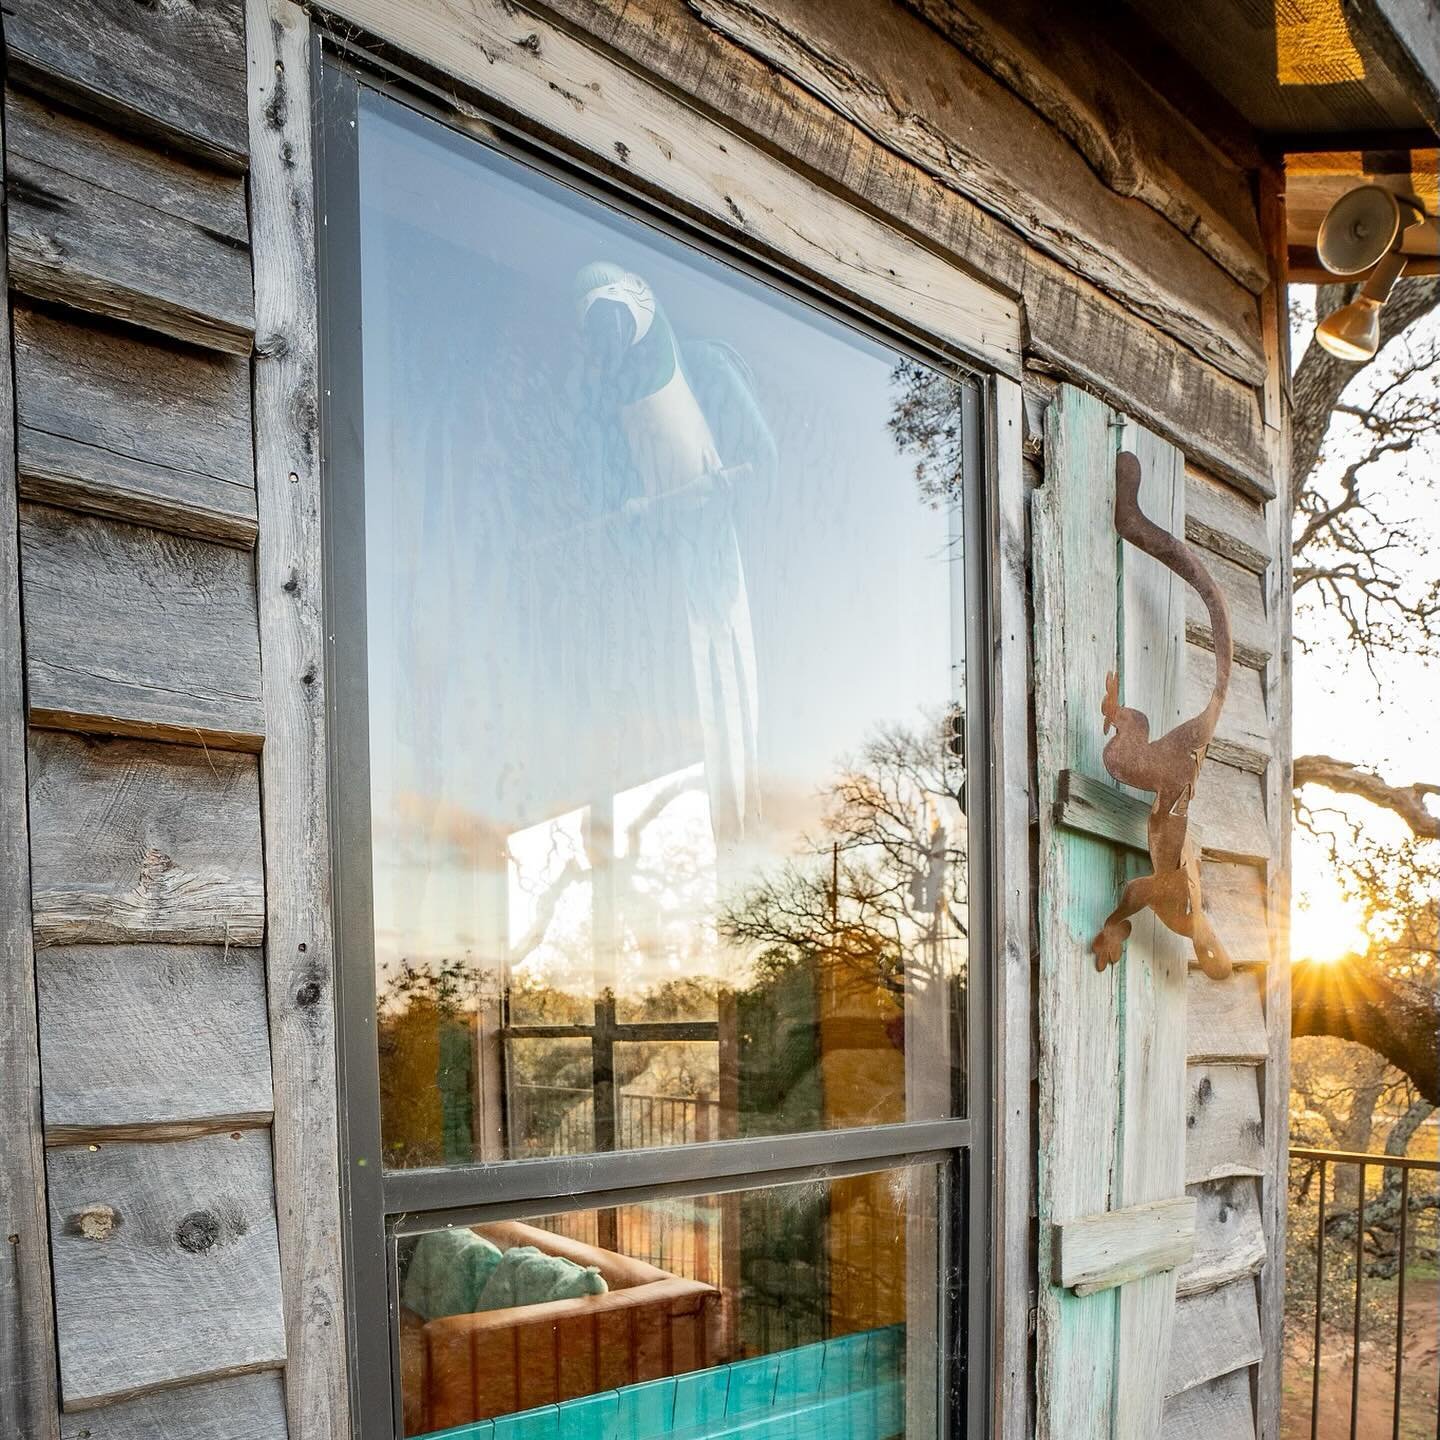 Discover the legacy vintage features of The Treehouse at Dos Conchas Ranch.

Nestled in the heart of our 800-acre Hill Country ranch, the Treehouse AirBnB is a masterpiece of craftsmanship, history and commitment to honoring the legacy of the communi